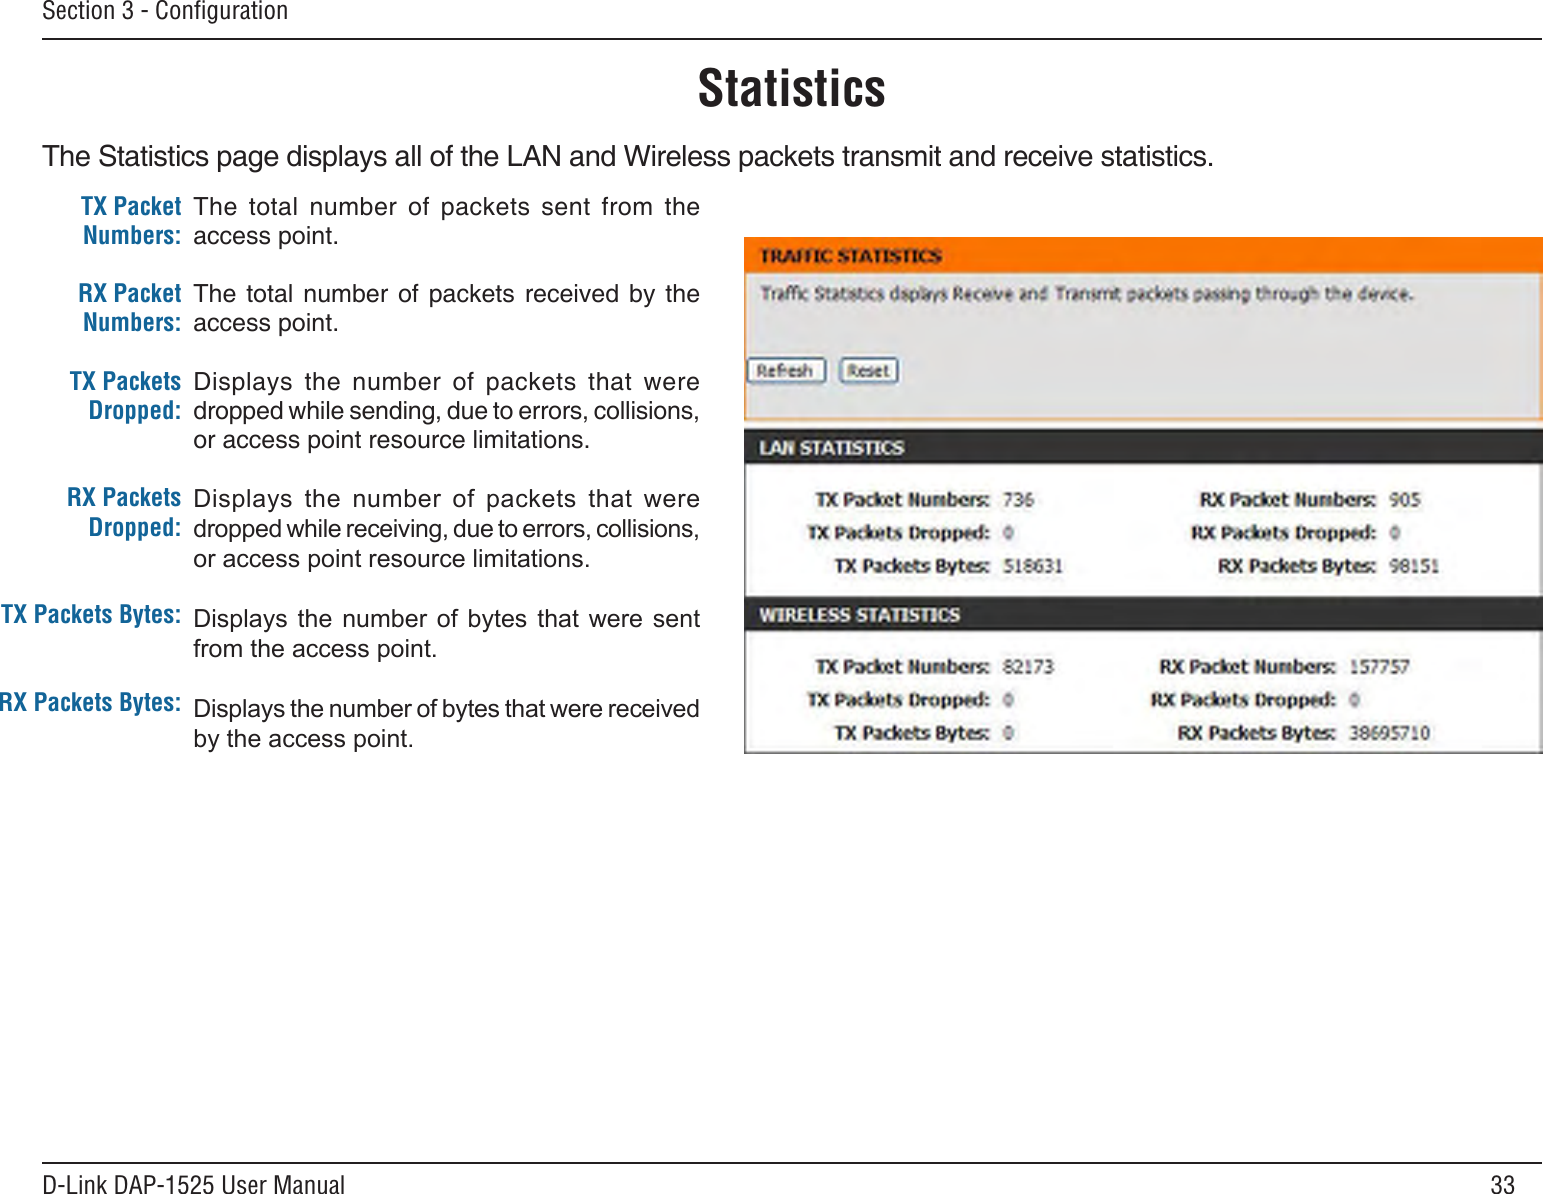 33D-Link DAP-1525 User ManualSection 3 - ConﬁgurationStatisticsThe Statistics page displays all of the LAN and Wireless packets transmit and receive statistics.TX Packet Numbers:RX Packet Numbers:TX Packets Dropped:RX Packets Dropped:TX Packets Bytes:RX Packets Bytes:The  total  number  of  packets  sent  from  the access point.The total  number  of  packets  received  by  the access point.Displays  the  number  of  packets  that  were dropped while sending, due to errors, collisions, or access point resource limitations.Displays the number of packets that weredroppedwhilereceiving,duetoerrors,collisions,oraccesspointresourcelimitations.Displays the number of bytes that were sentfromtheaccesspoint.Displaysthenumberofbytesthatwerereceivedbytheaccesspoint.